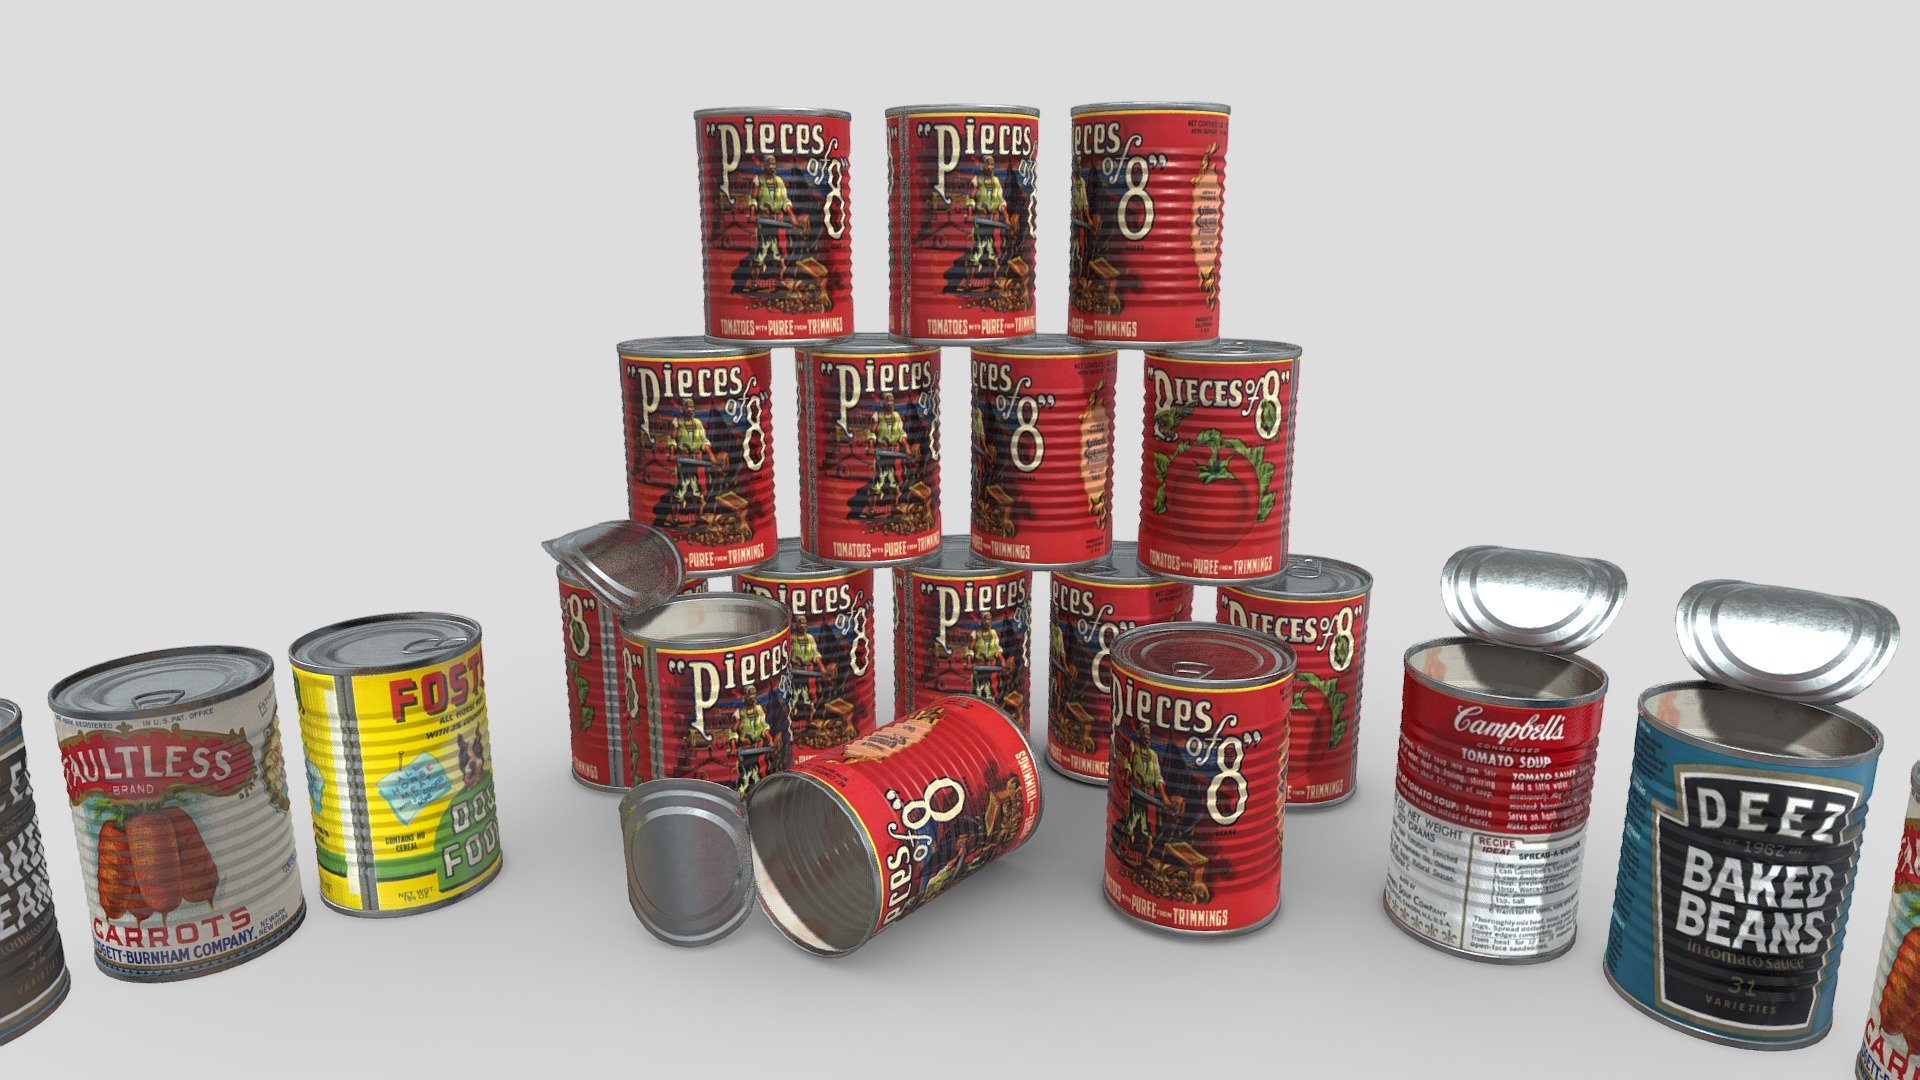 1024x1024 textures. Color, Roughness, Metallic, normal and AO.
Open can has 5655 faces, Closed can has 3832 faces.
Download additional files for separate models!
Models are scaled for Source 2 (imperial). Scale models by ~0,0254 for metric 3d model